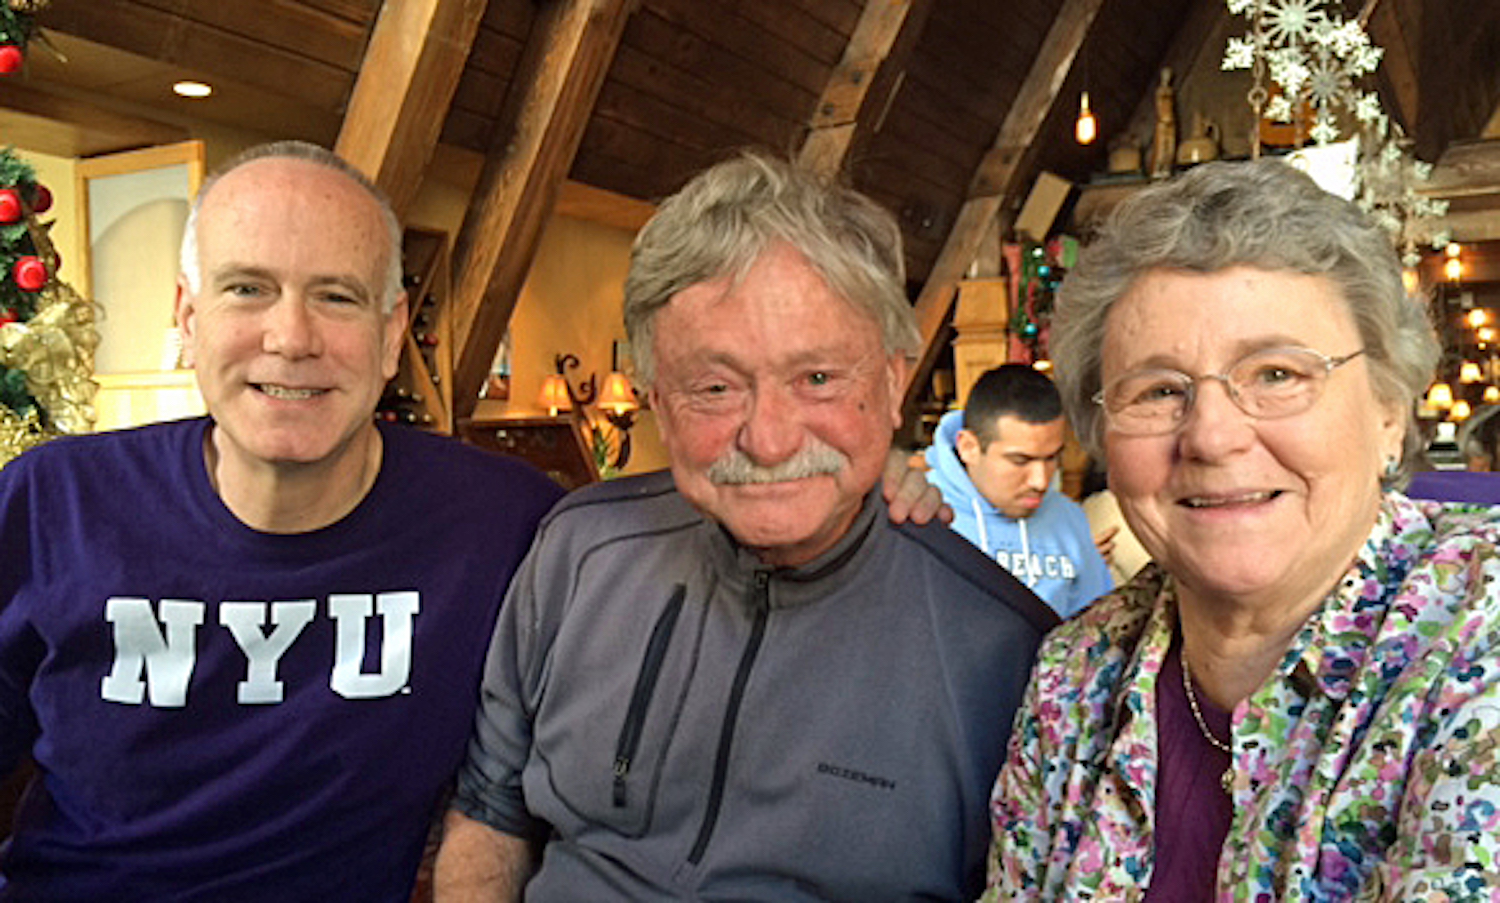 Mark with his uncle Don and his mom Martha in 2013